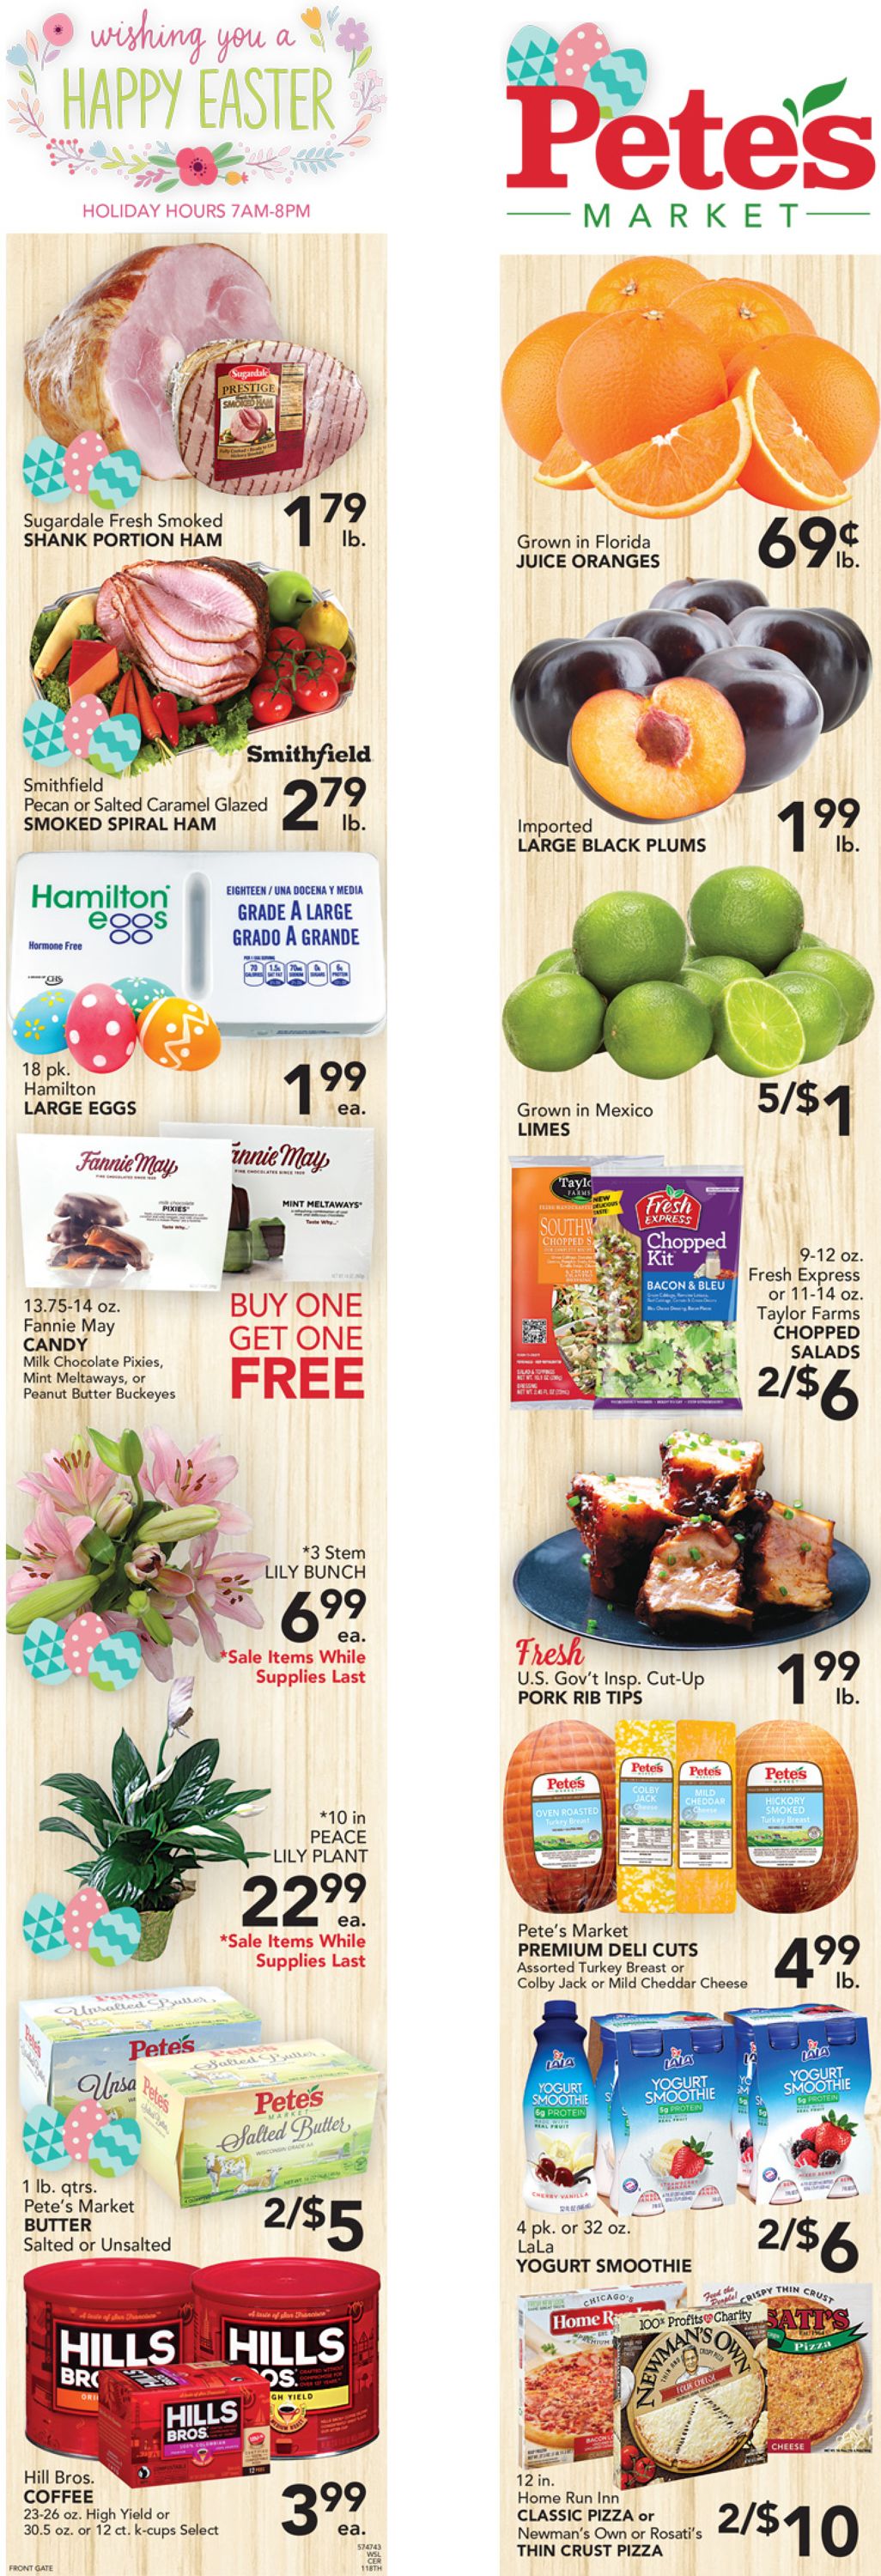 Pete's Fresh Market Easter 2021 ad Weekly Ad Circular - valid 03/31-04/06/2021 (Page 5)